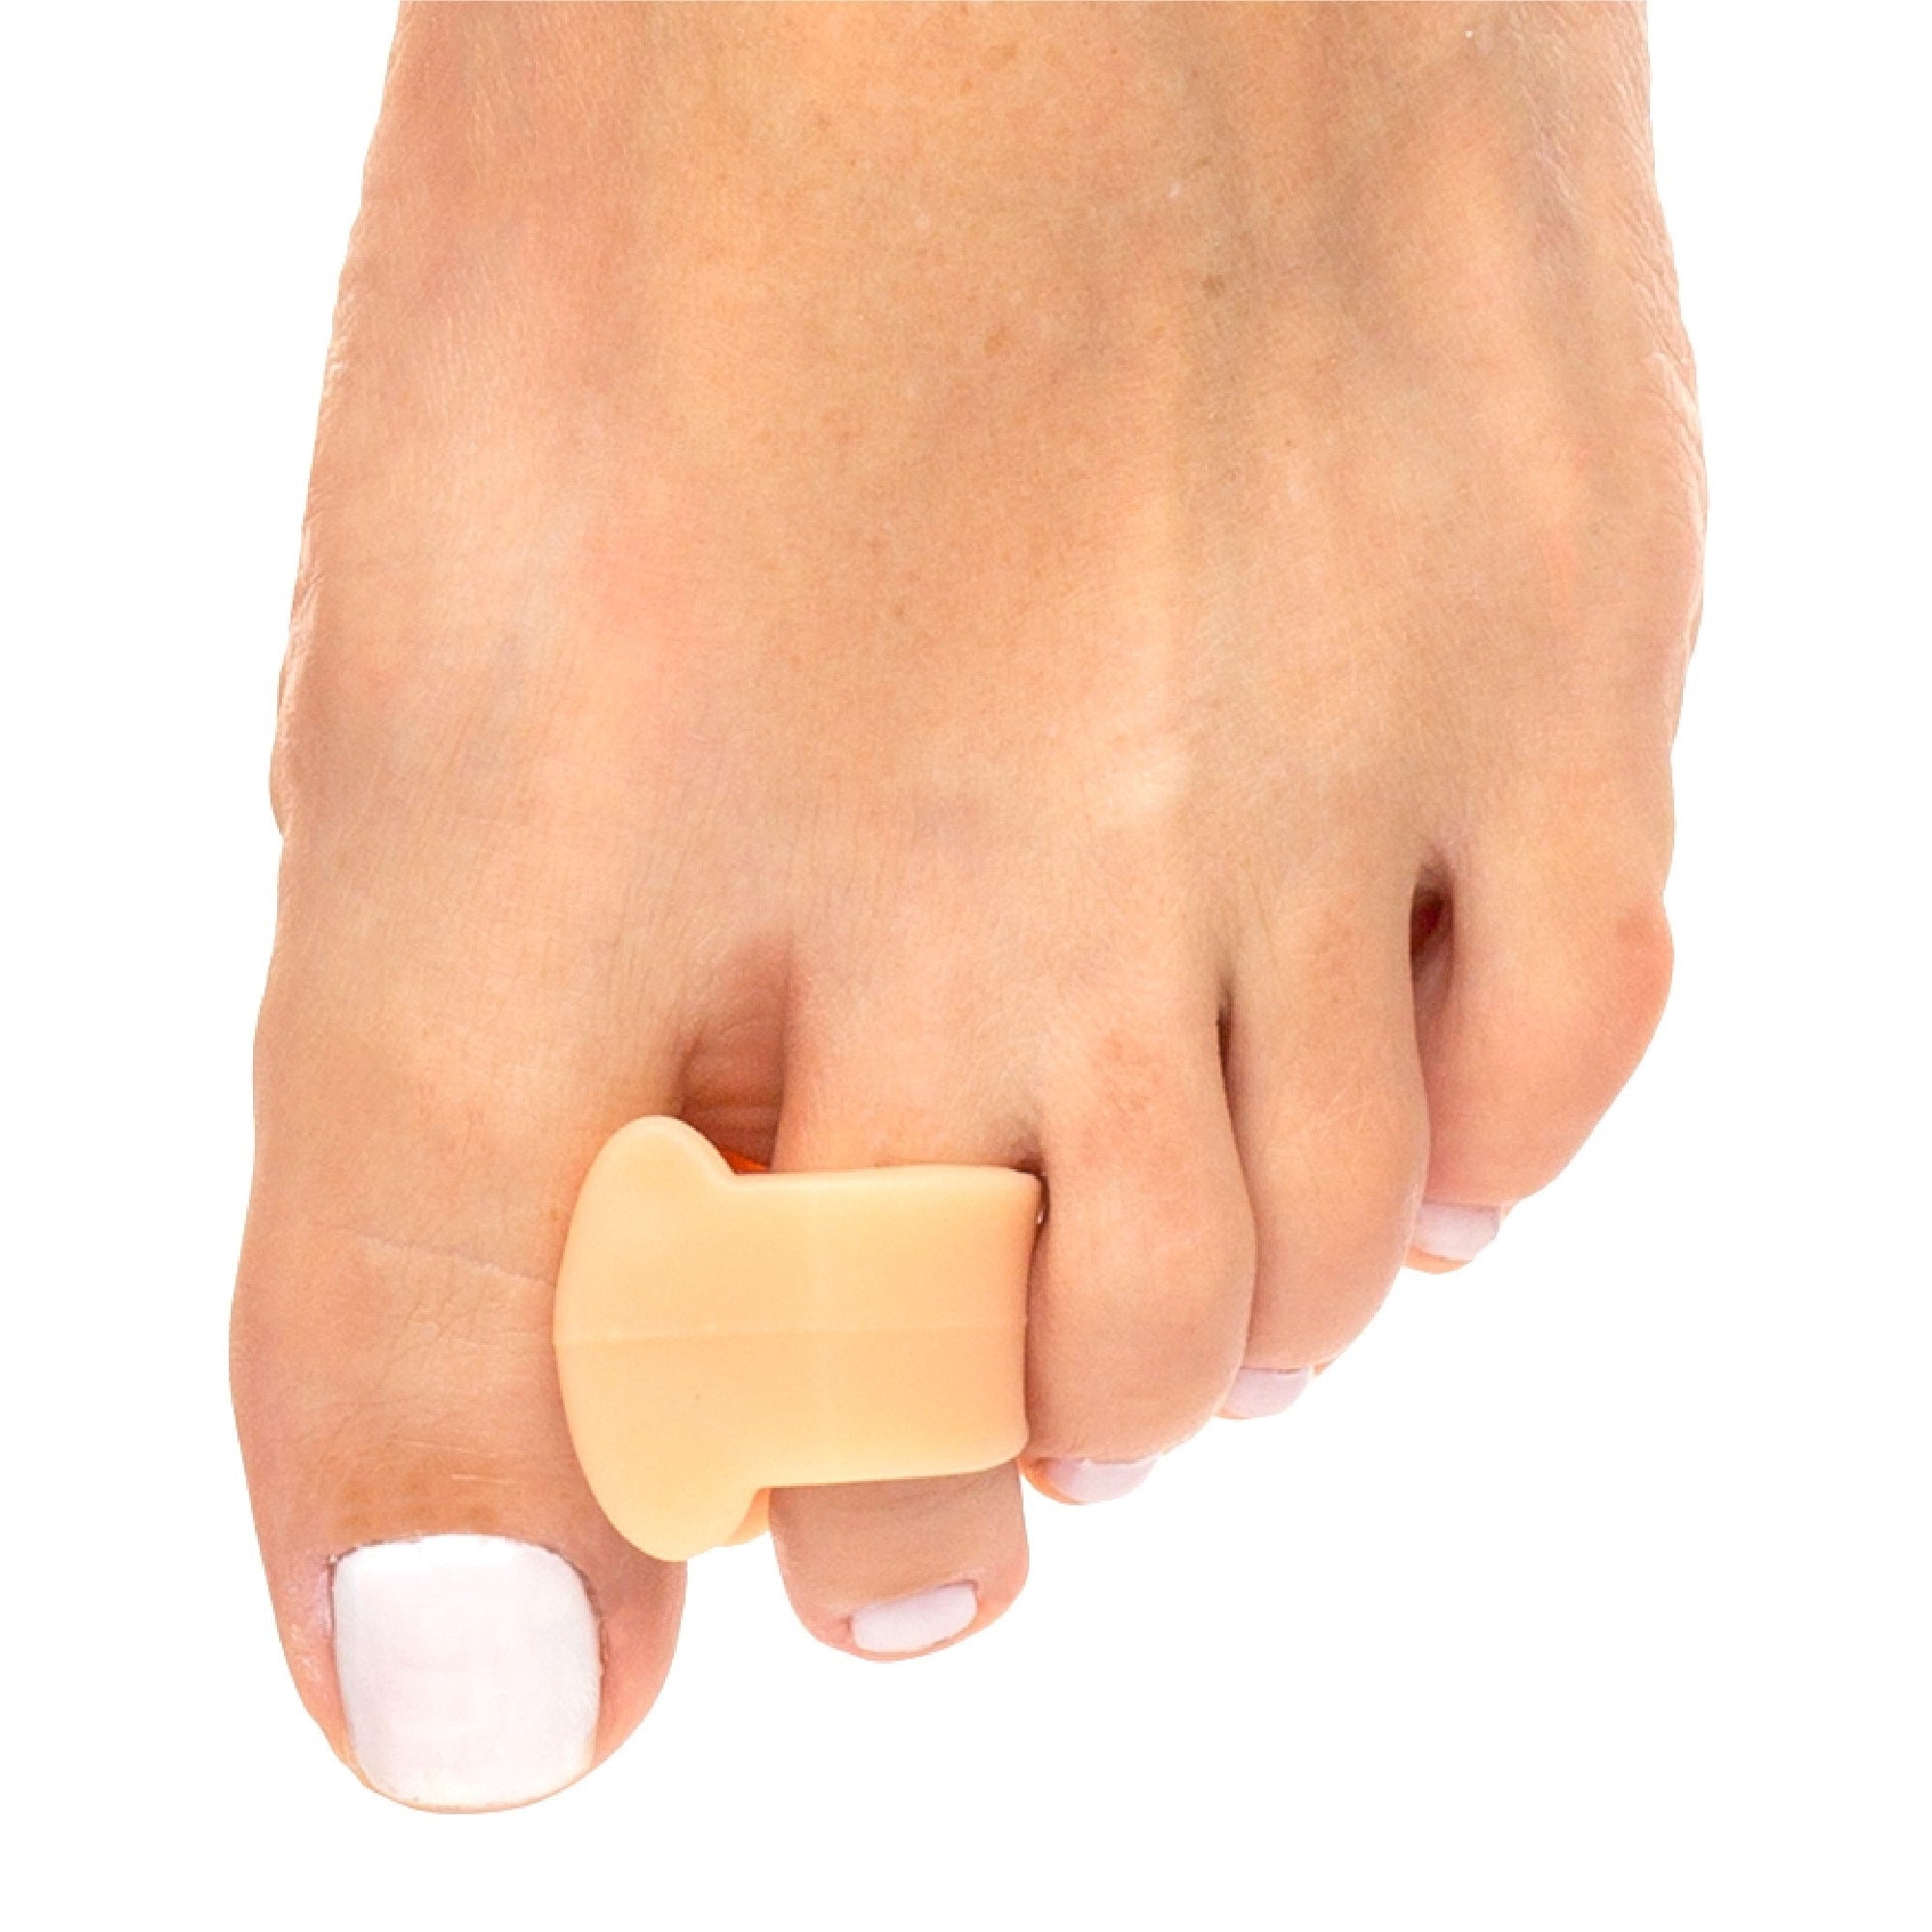 Single Loop Toe Spacer for Bunion Pain - 4 Count - ZenToes